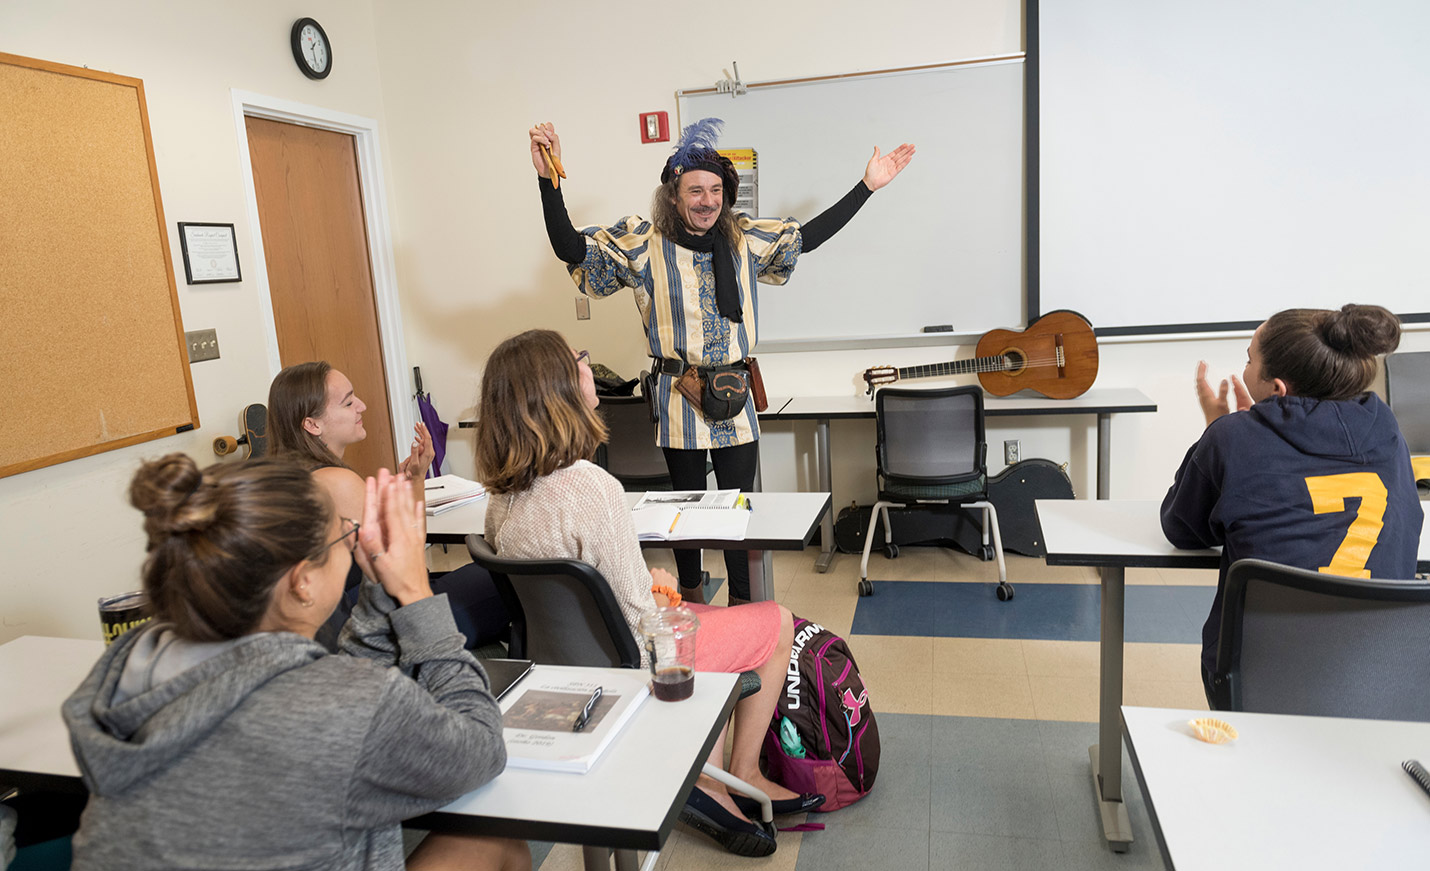 A man dressed as Don Quixote uses animated gestures as he stands in front of a class 